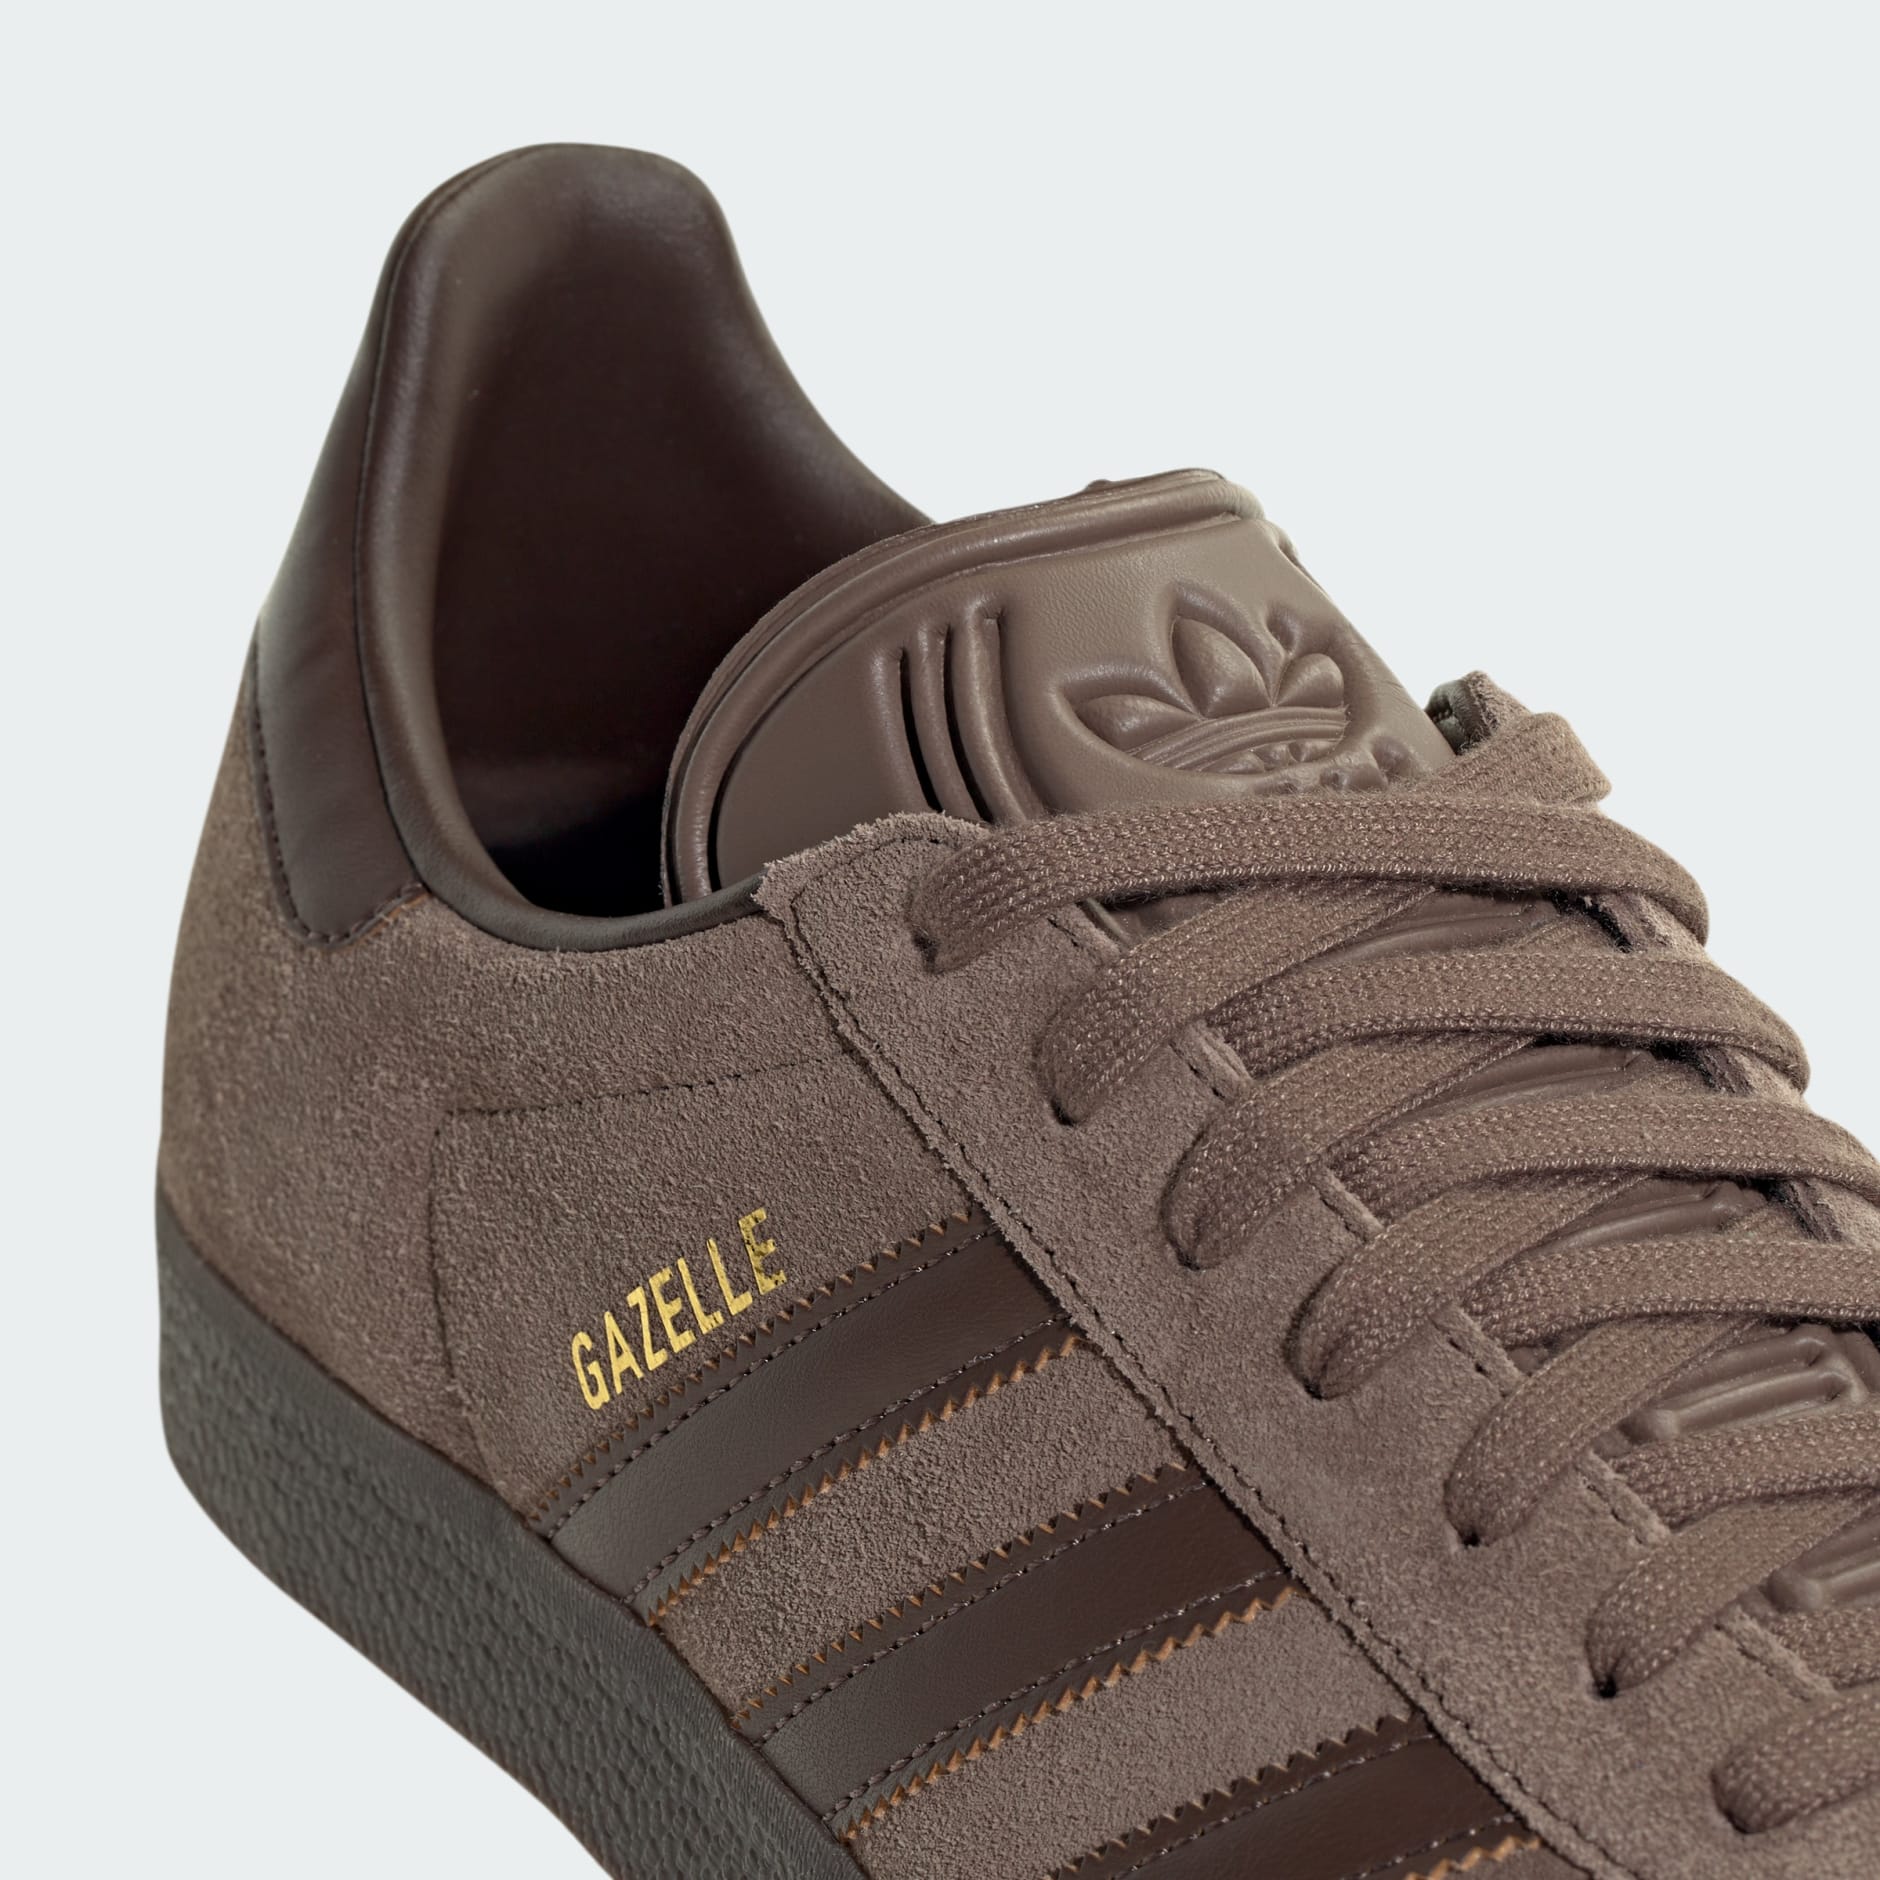 adidas Munchen Oktoberfest Classic Two Tone Brown Suede Shoes Trainers |  eBay